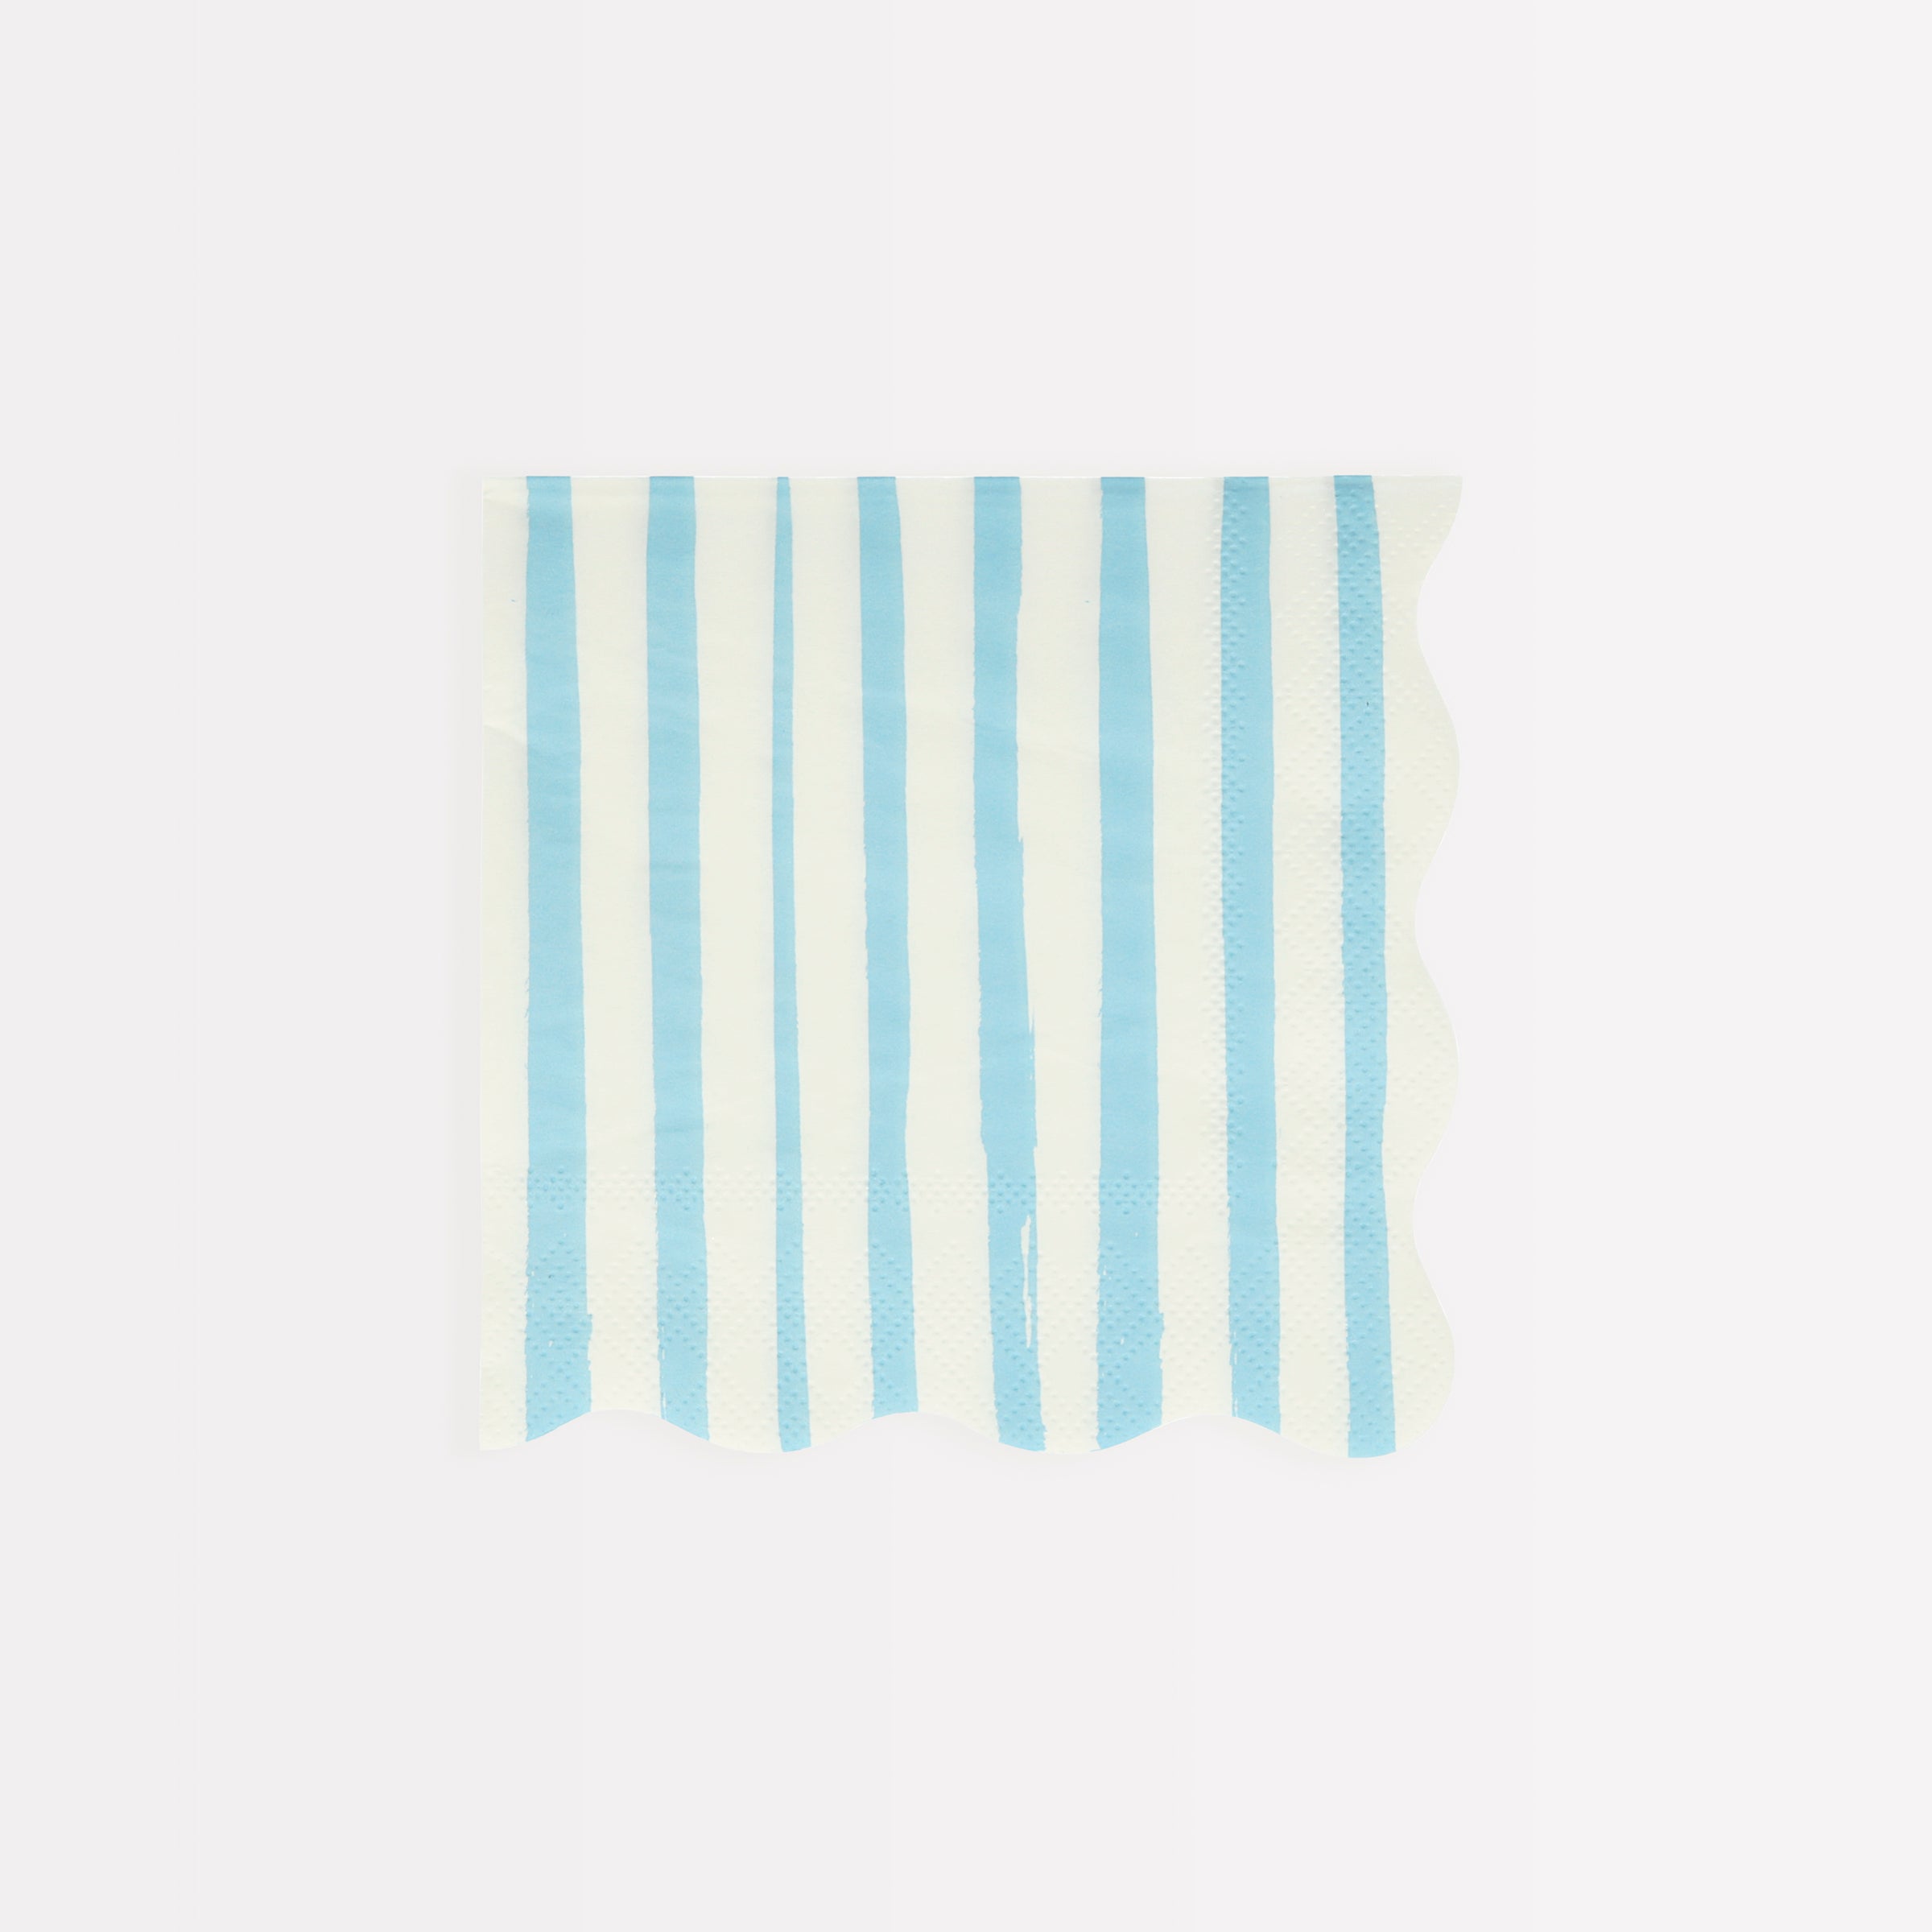 Our small napkins, paper napkins in blue and white, are ideal to add to your birthday party supplies.